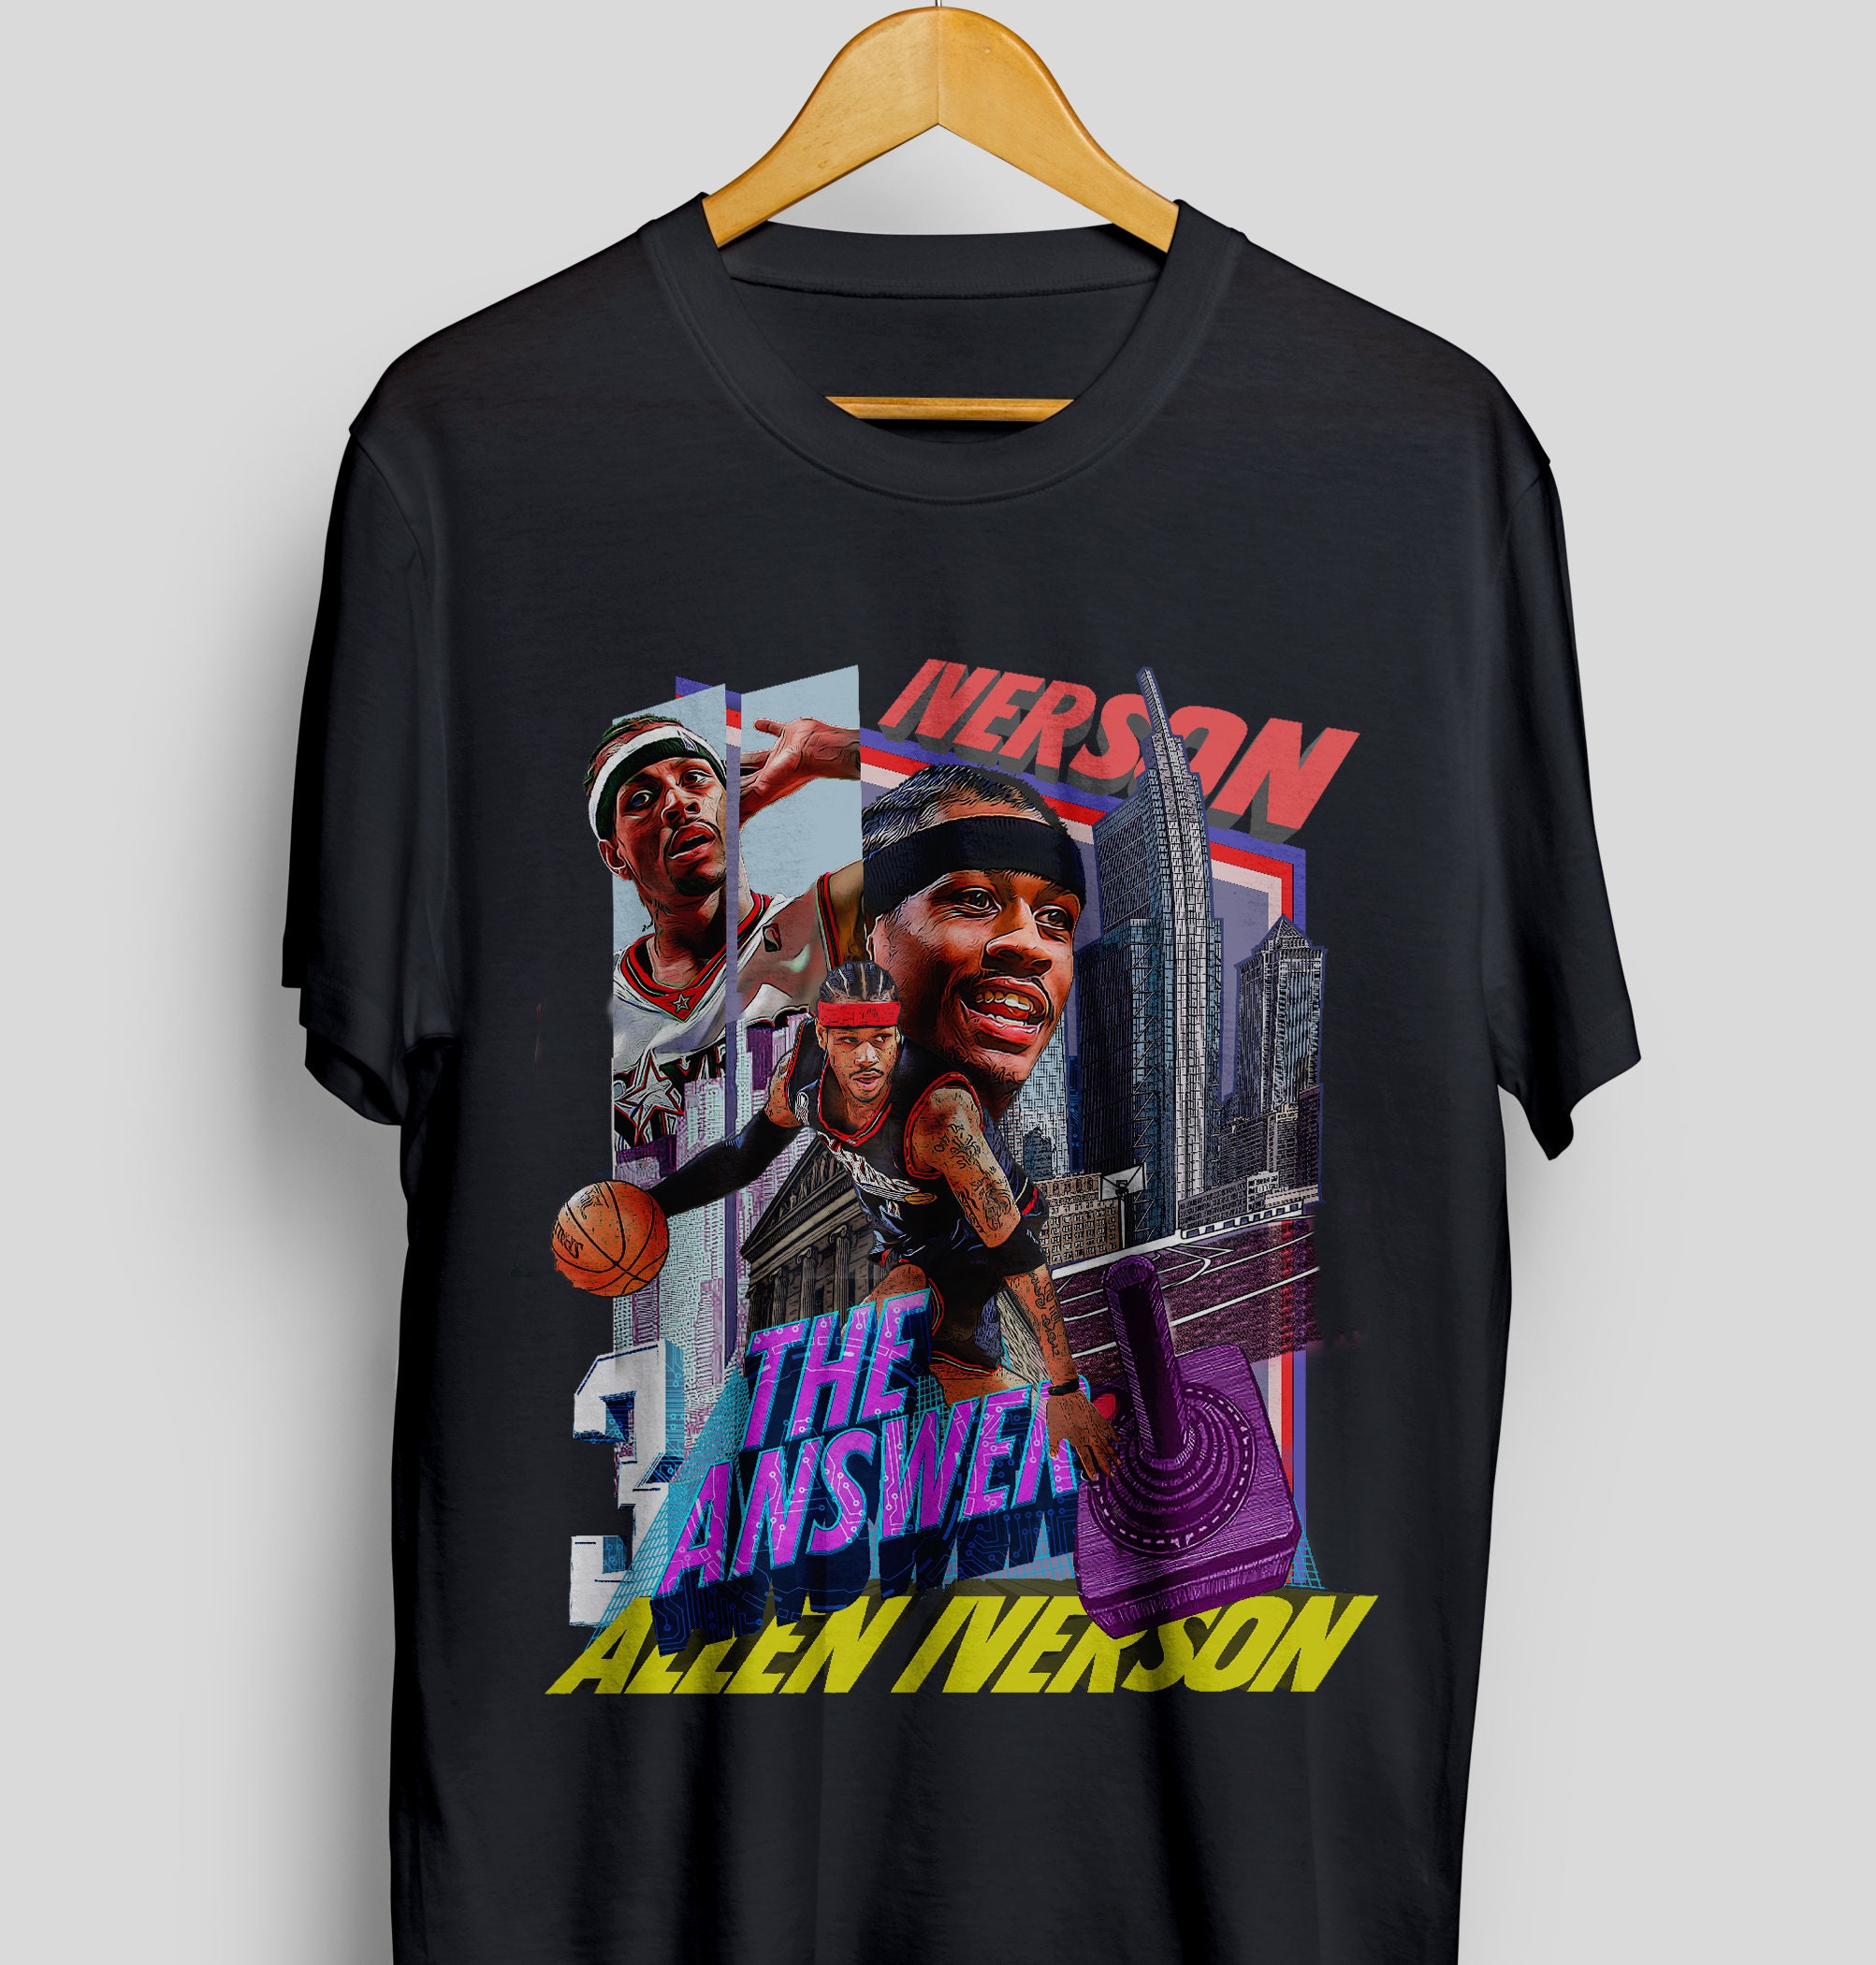 Vintage Allen Iverson Graphic T-Shirt, The Answer 90s Graphi - Inspire  Uplift